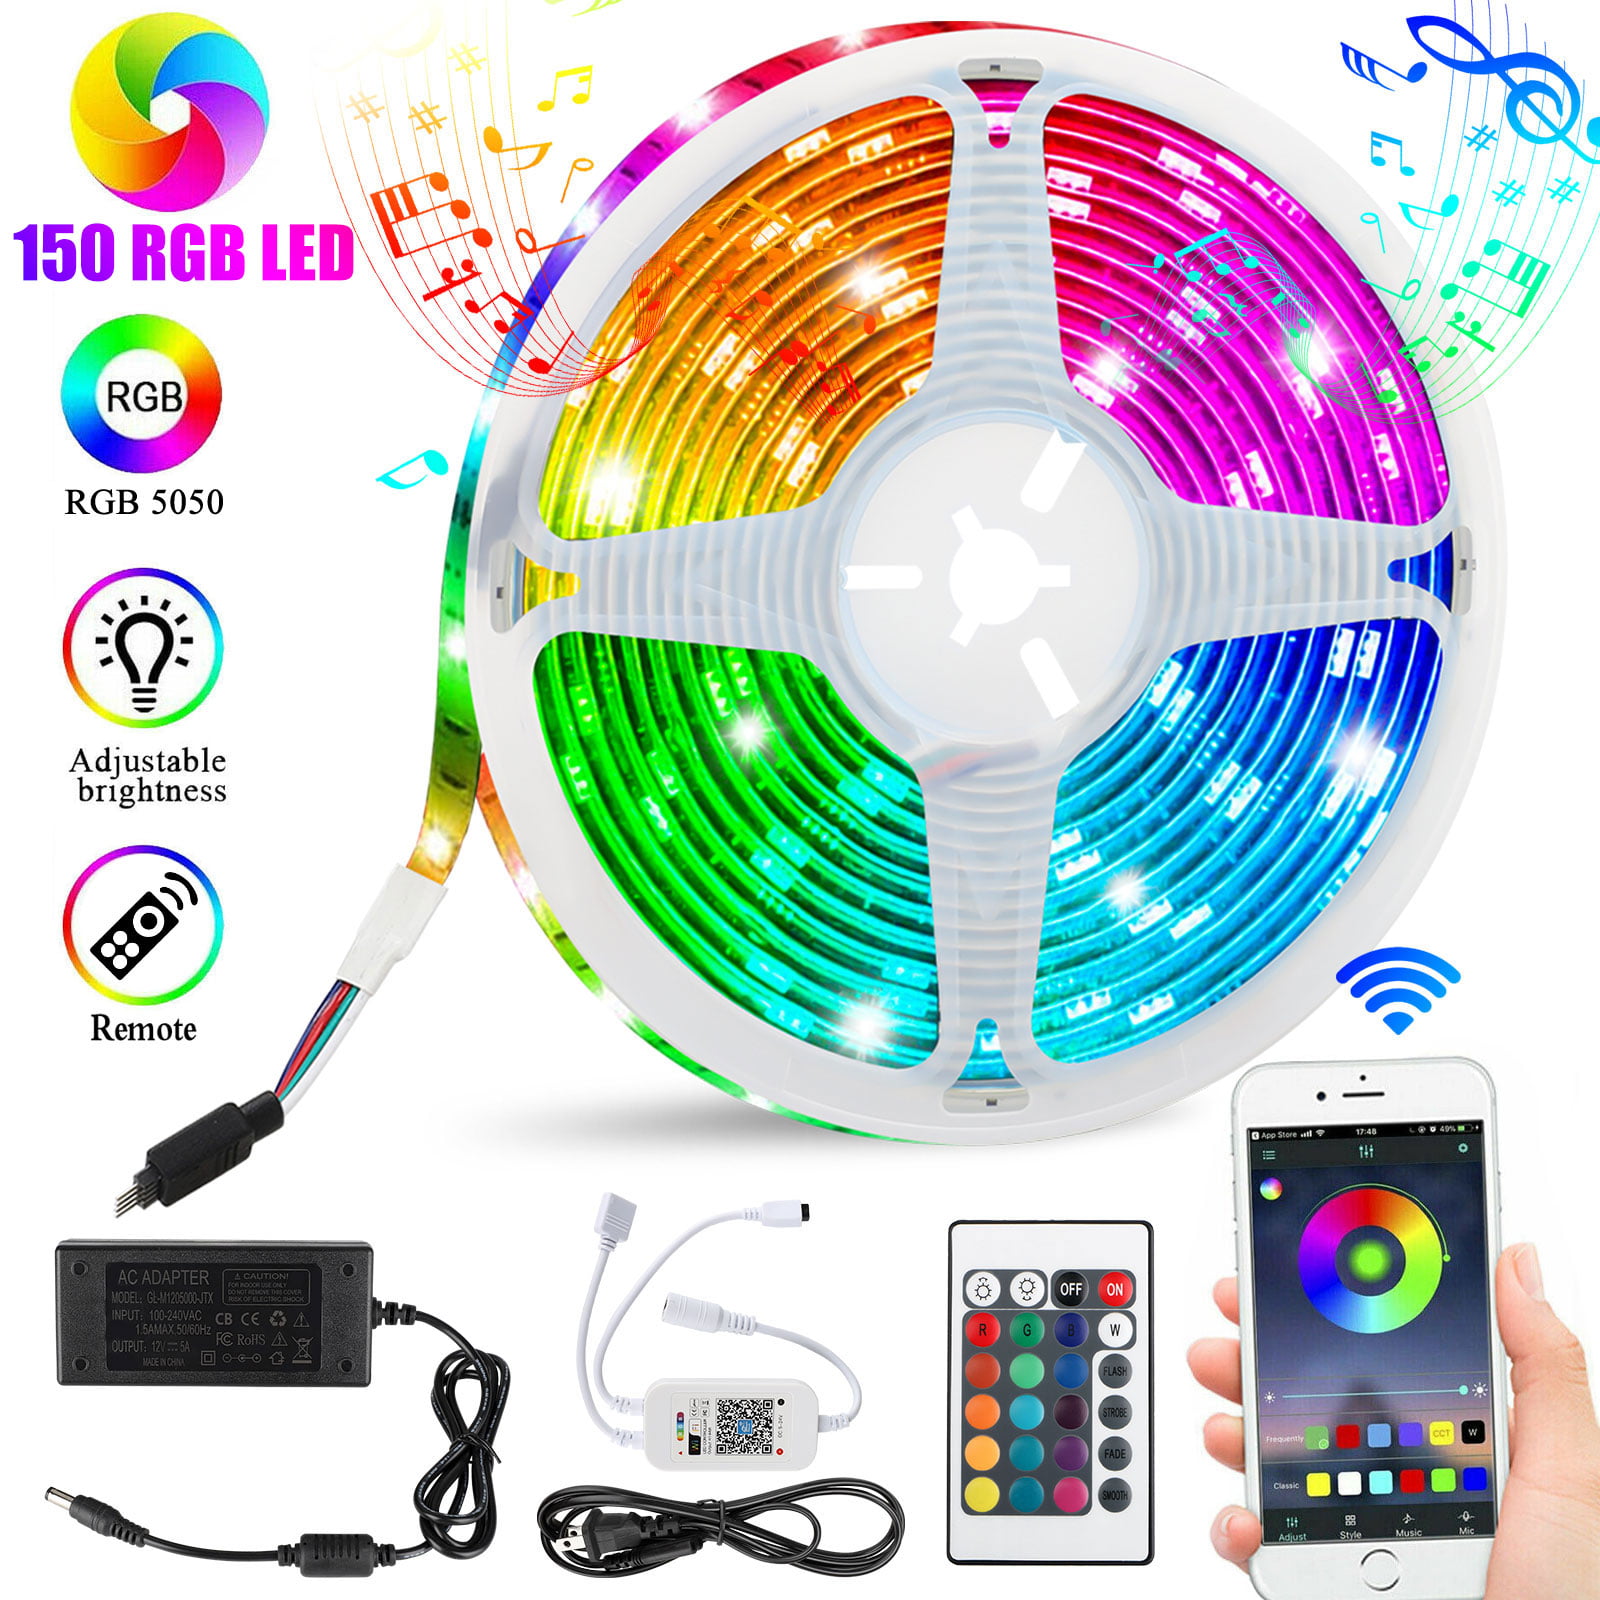 Details about   Battery Powered RGB LED Light Strip Multi Color TV PC Home Wedding Mood Lights 